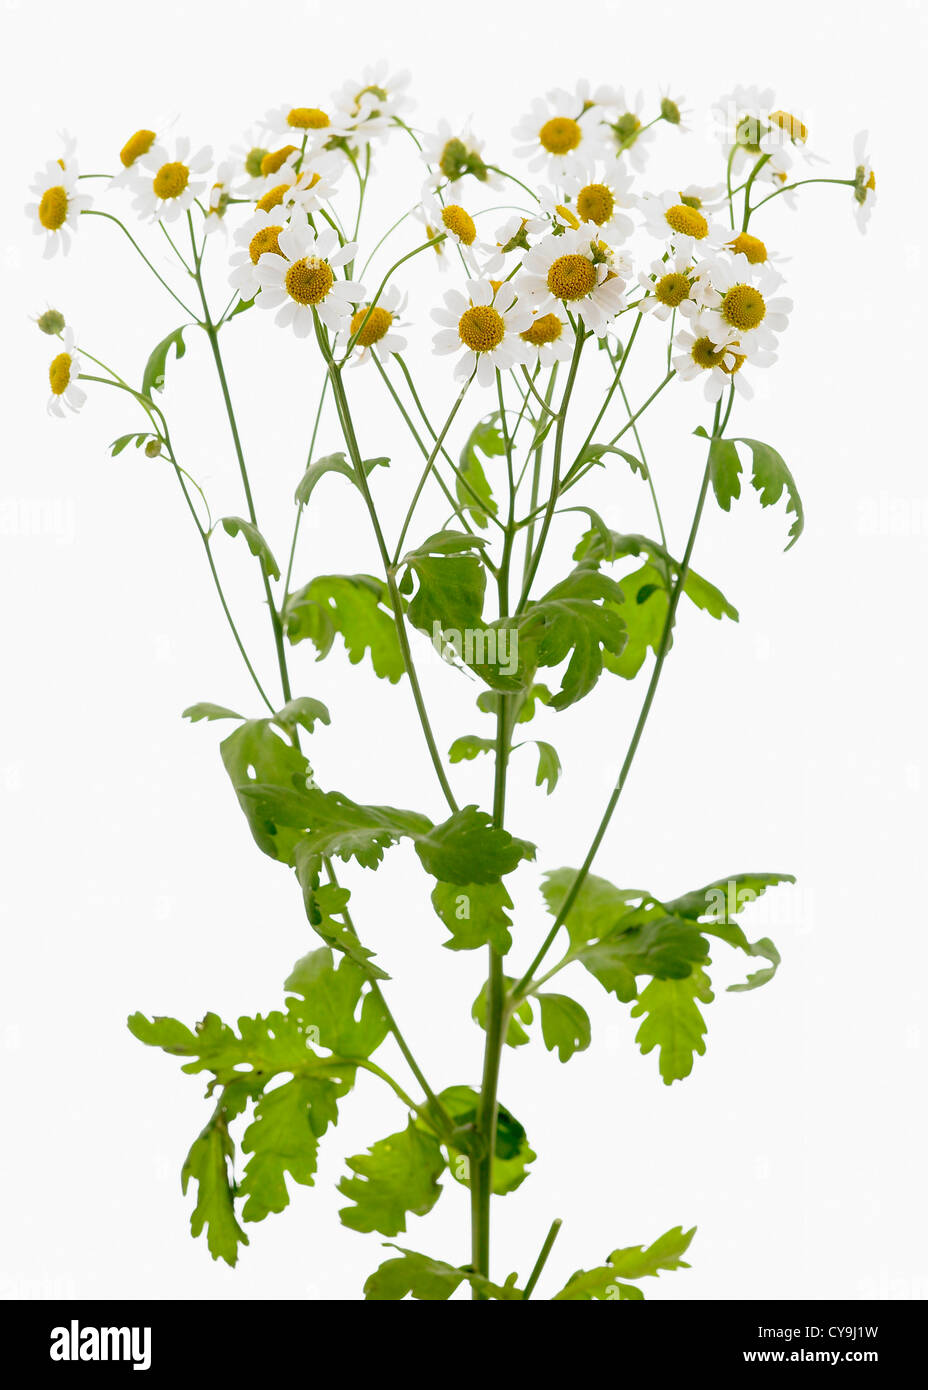 Tanacetum parthenium, Feverfew yellow flowers on green leafy stems against a white background Stock Photo